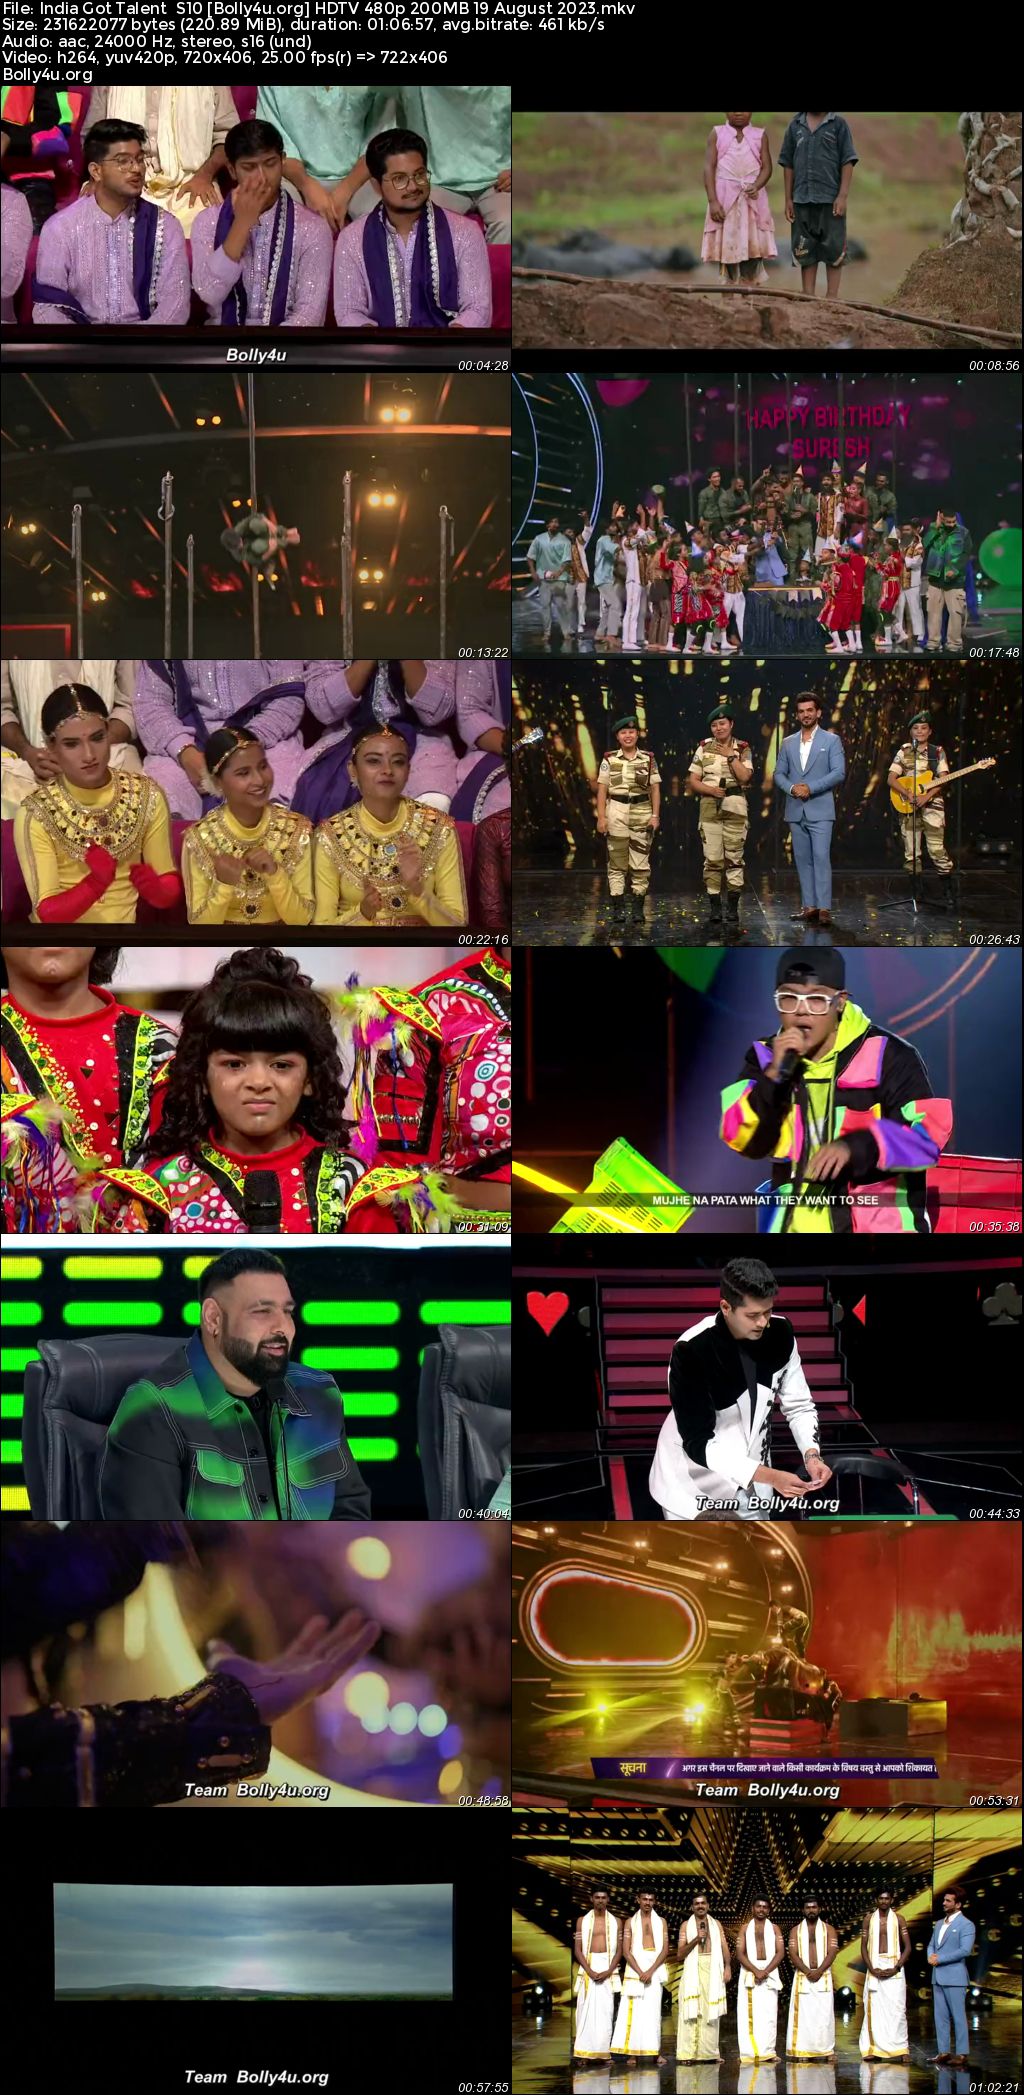 India Got Talent S10 HDTV 480p 200MB 19 August 2023 Download